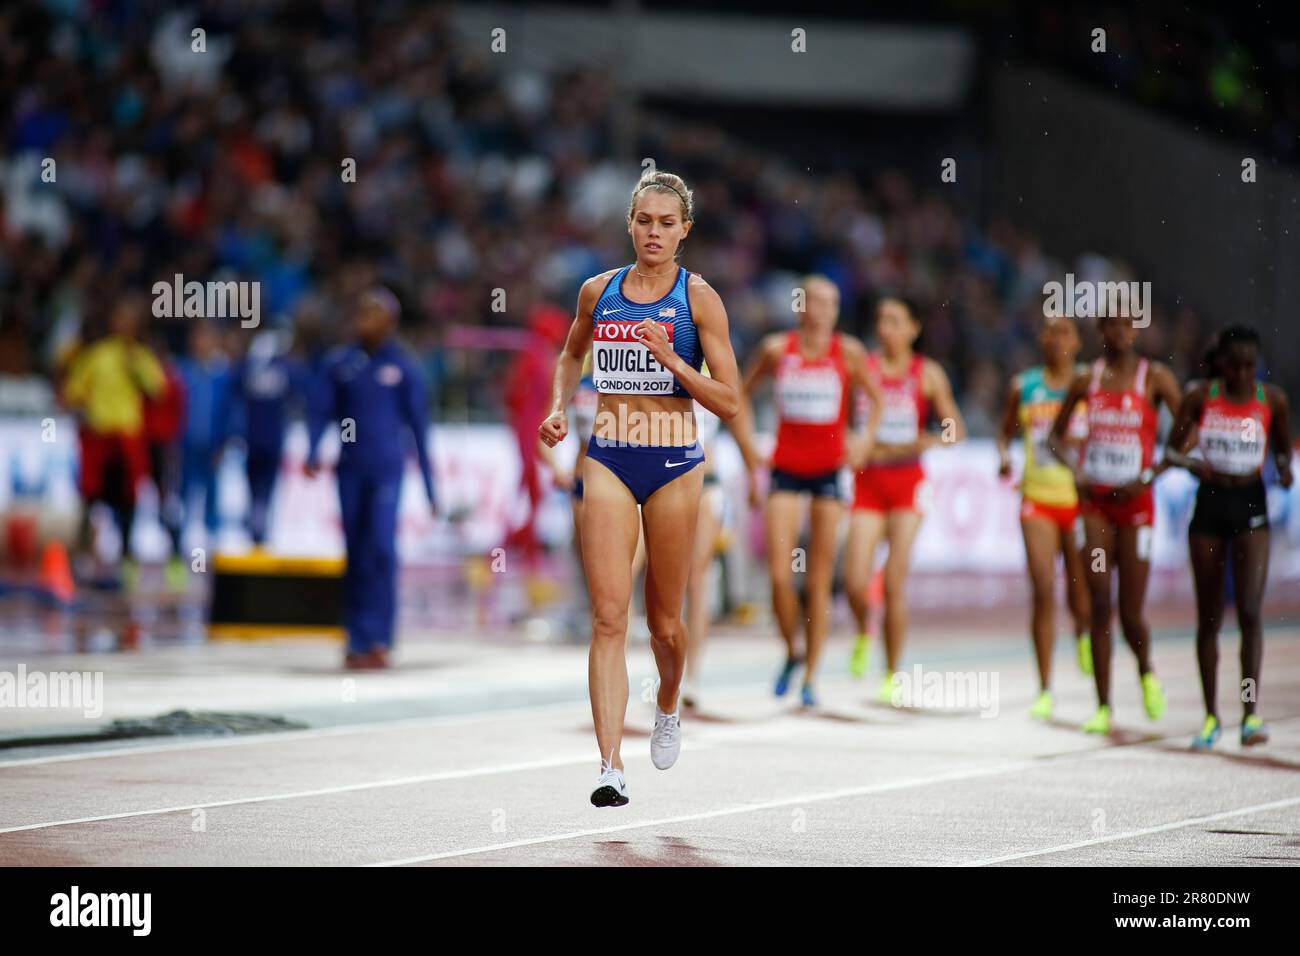 Olympian Colleen Quigley Is Still Chasing the Steeplechase with Whoop